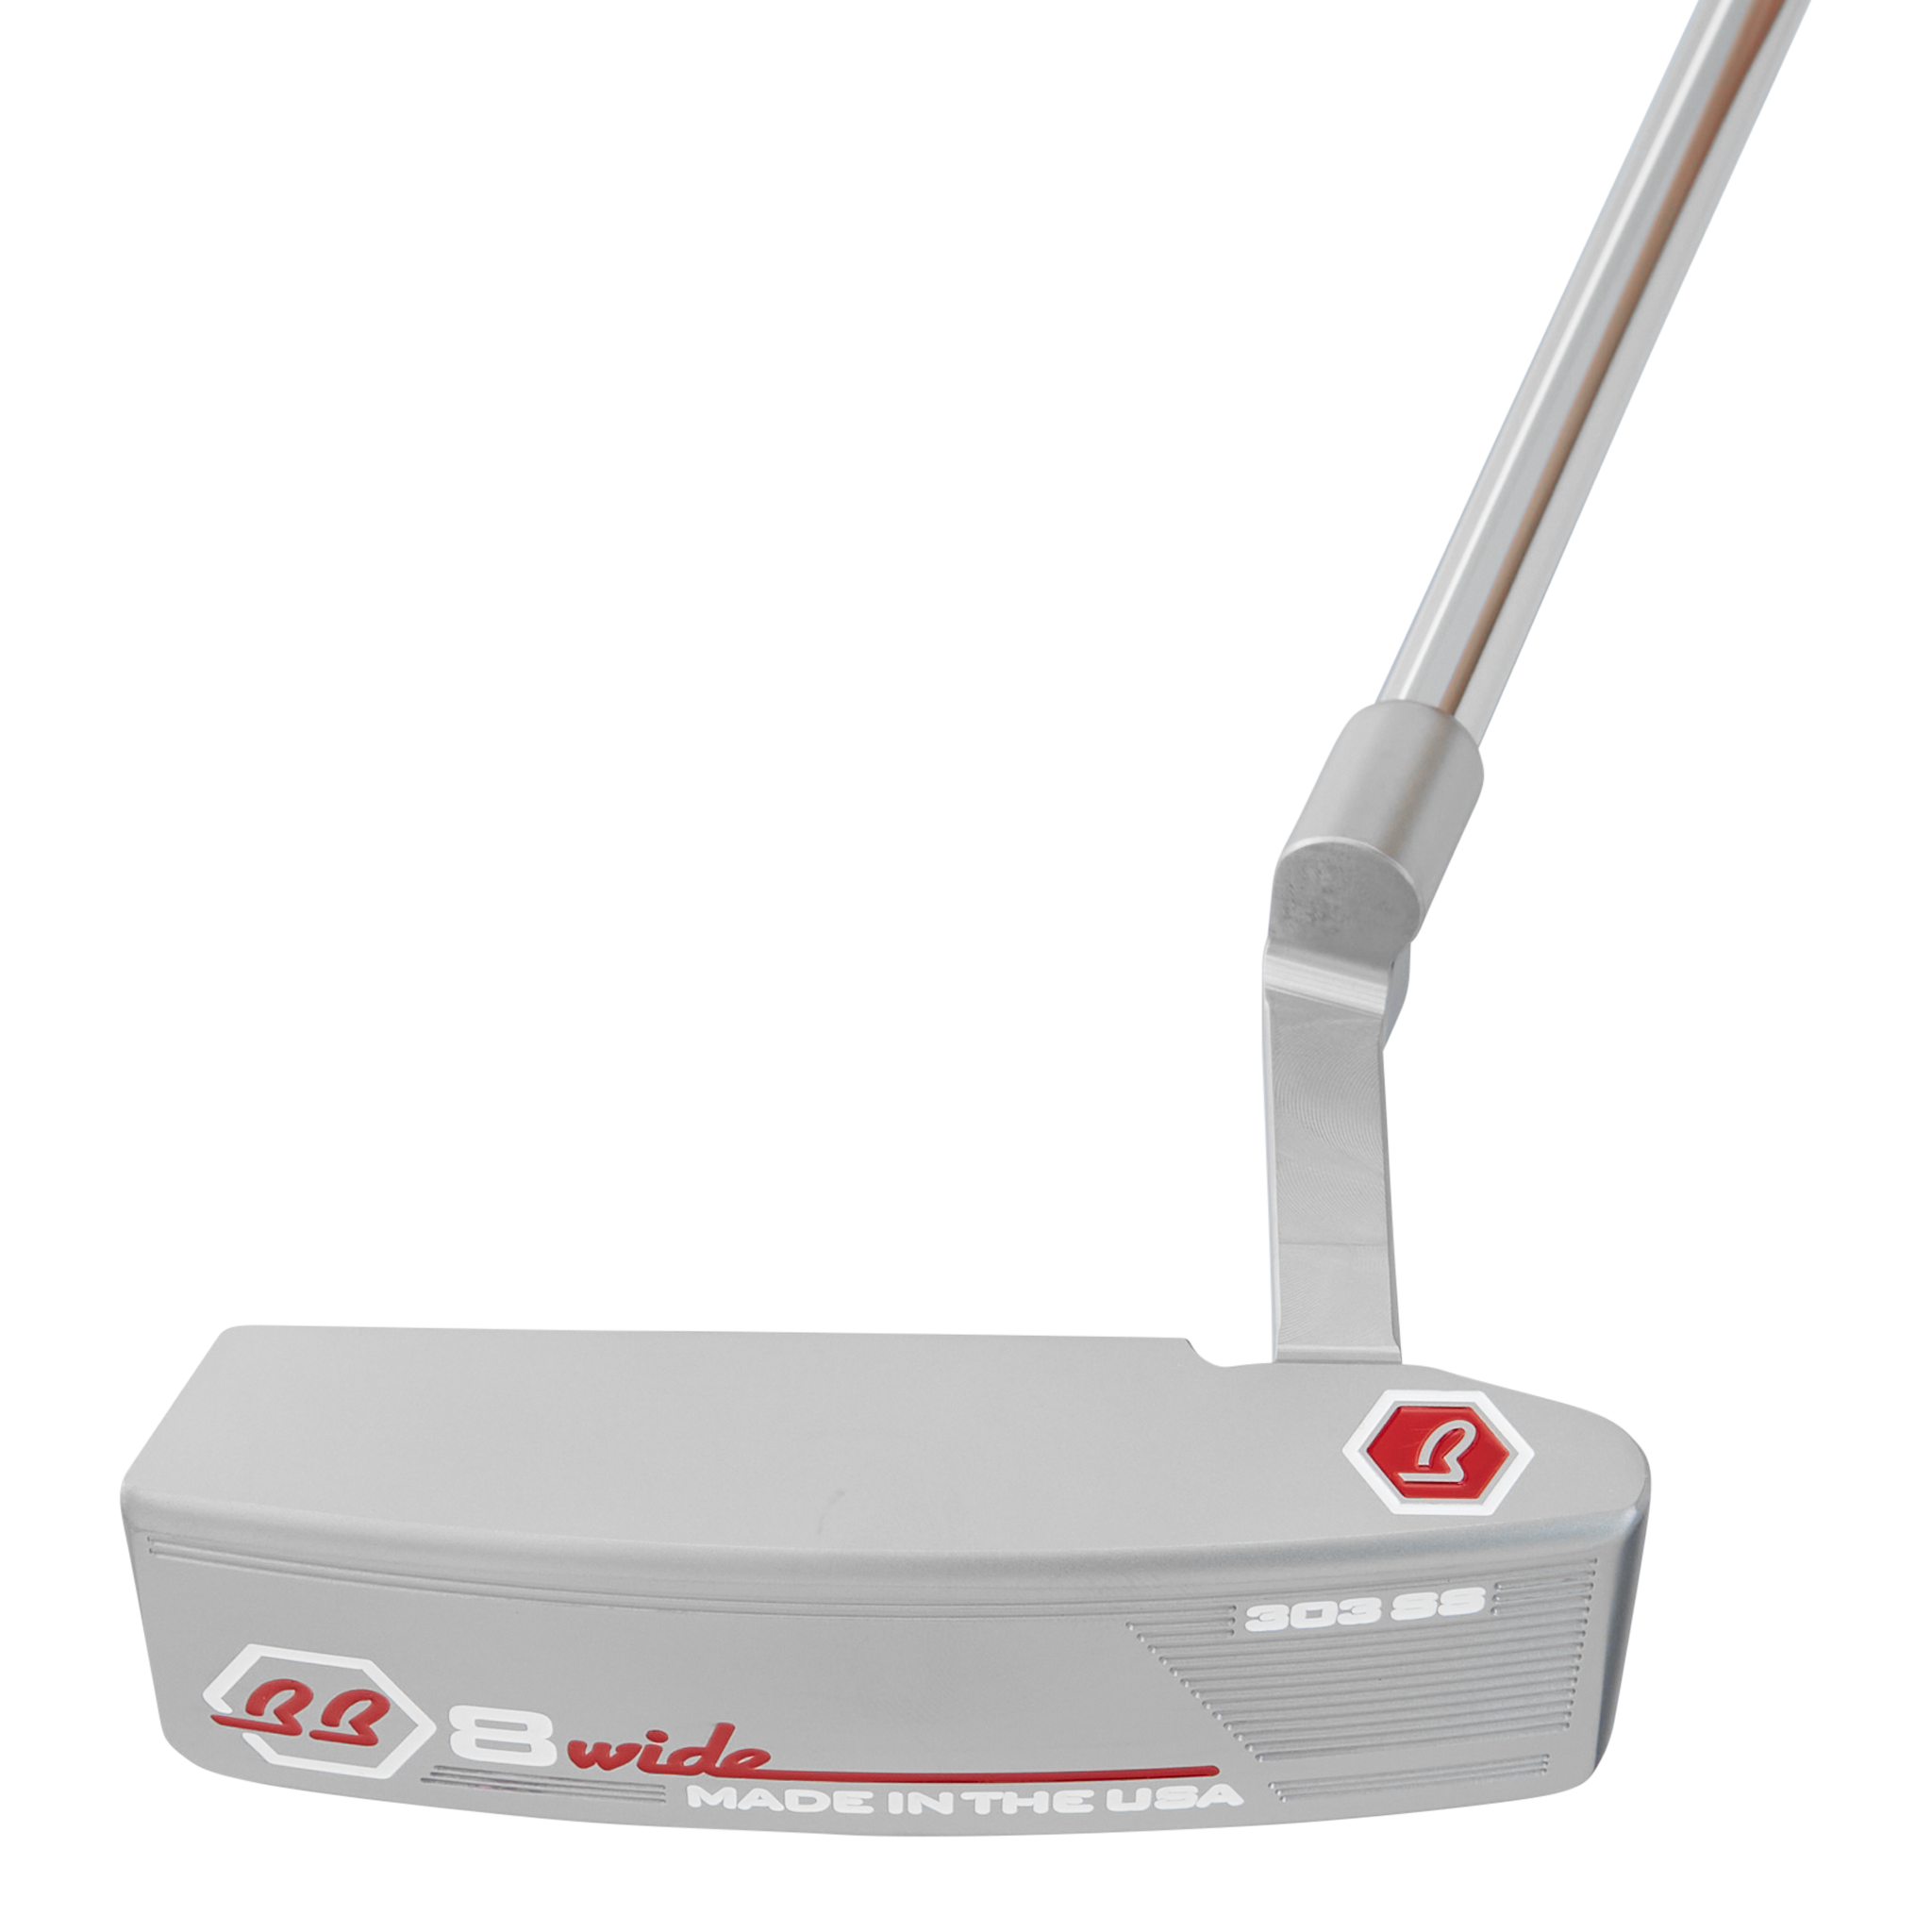 Studio B Reserve BB8 Wide Smooth Face Putter - main